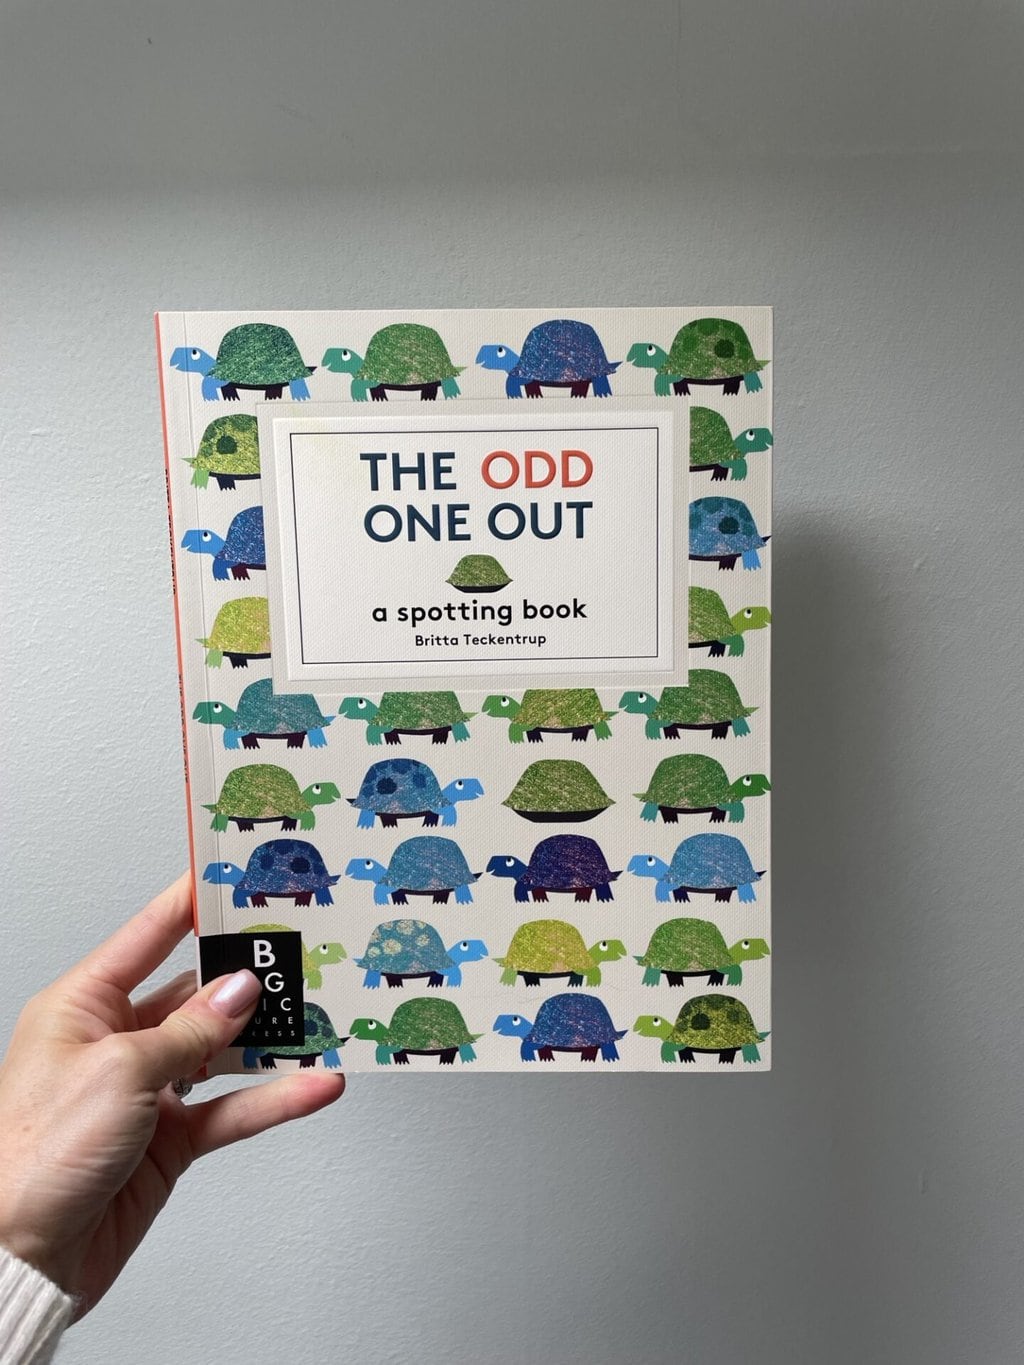 The Odd One Out - a spotting book